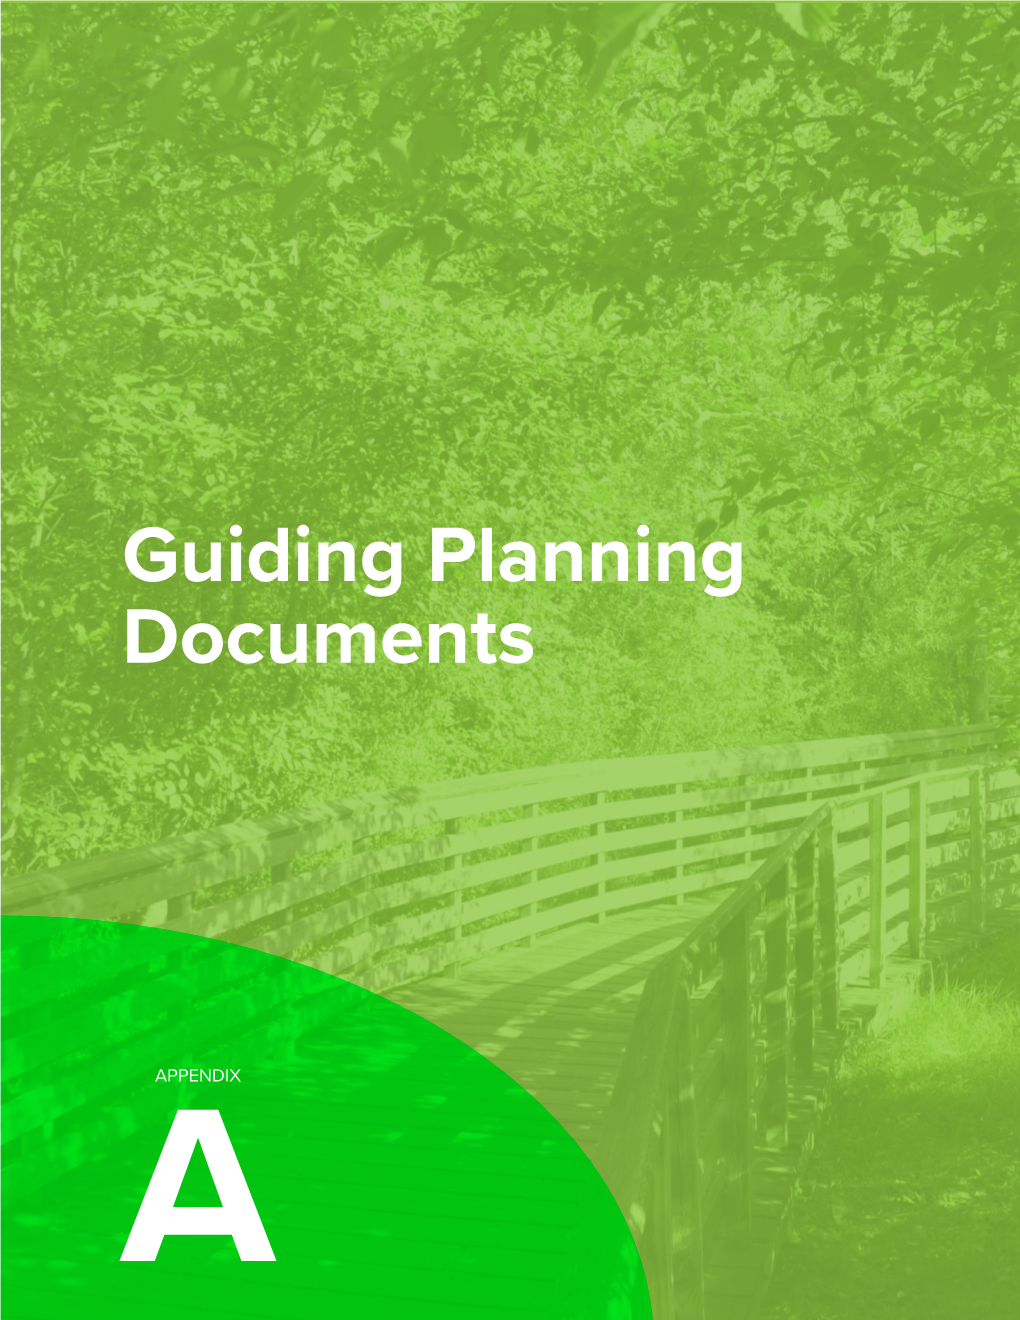 Guiding Planning Documents